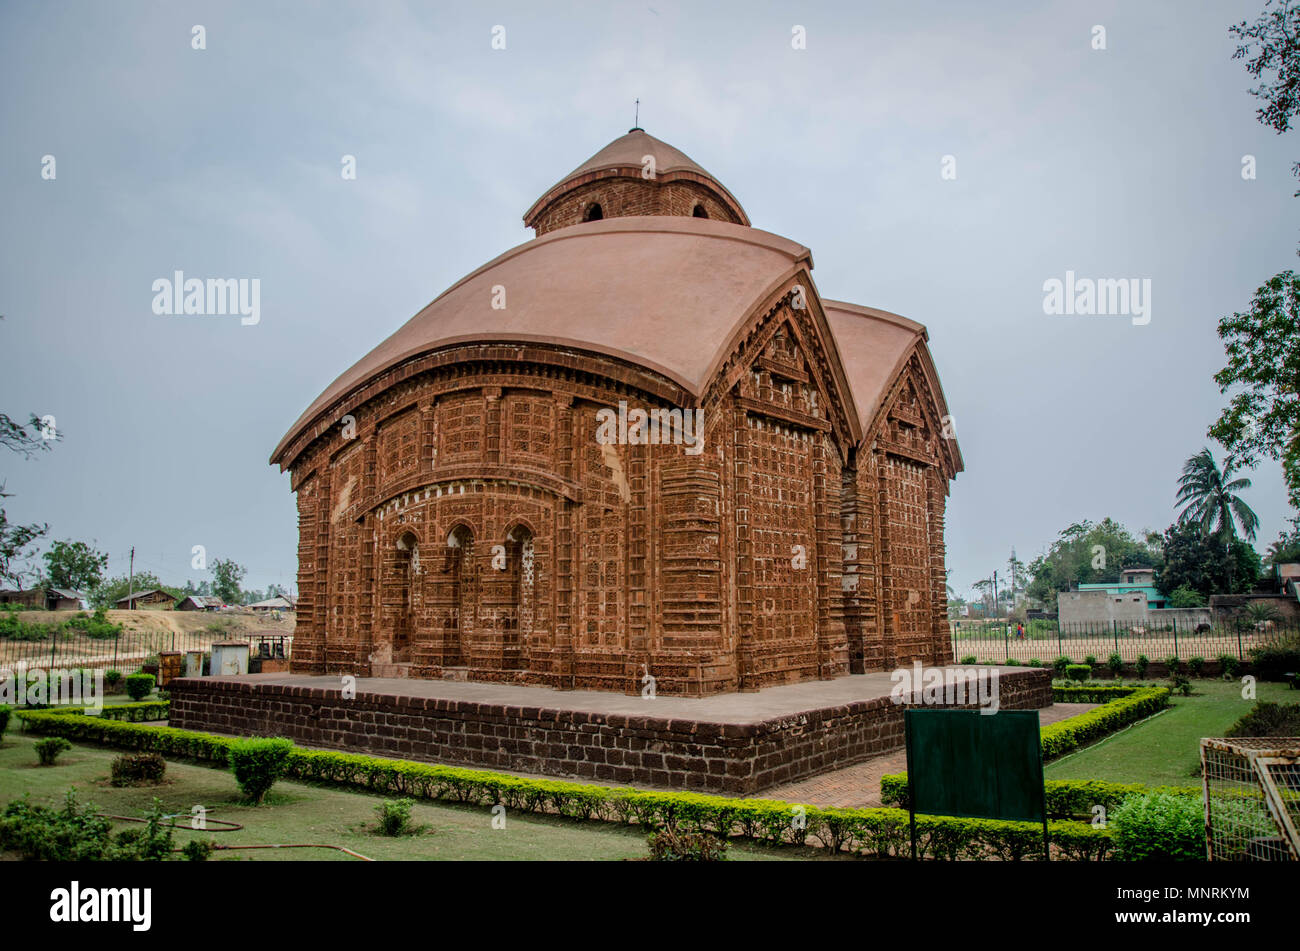 Terracotta temples of Bishnupur. Speciality of the Bishnupur and a the carvings on the temple will mesmerise the viewer. Stock Photo